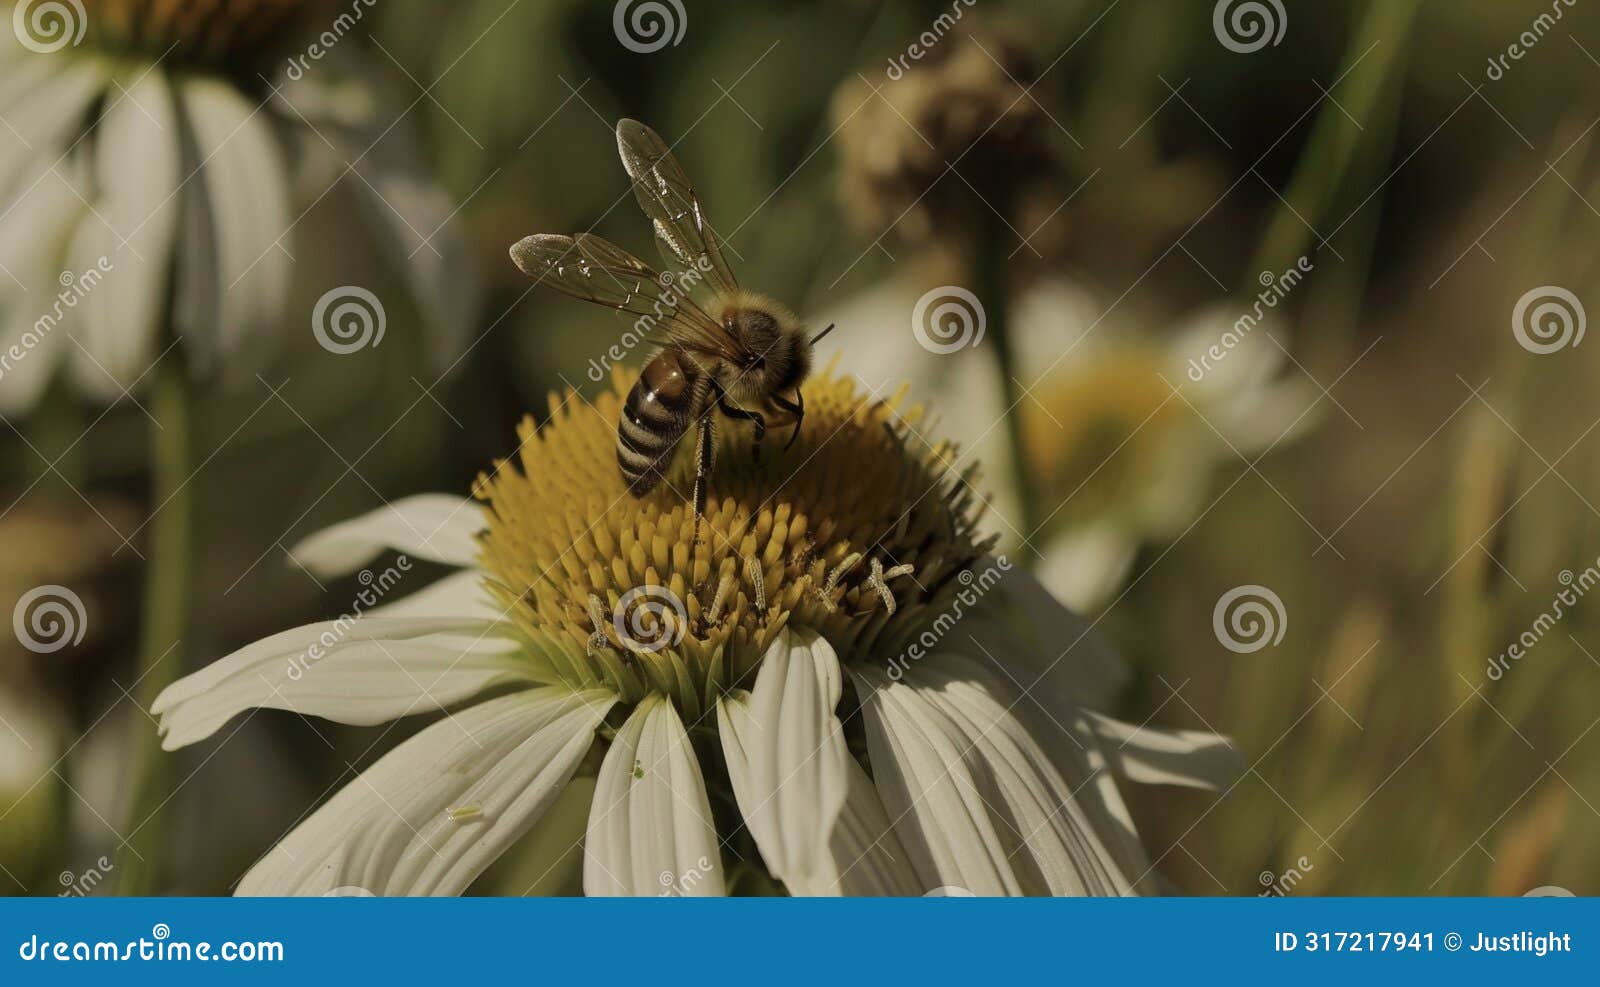 the delicate wings of the bees beat effortlessly as they move from flower to flower spreading life and vitality through